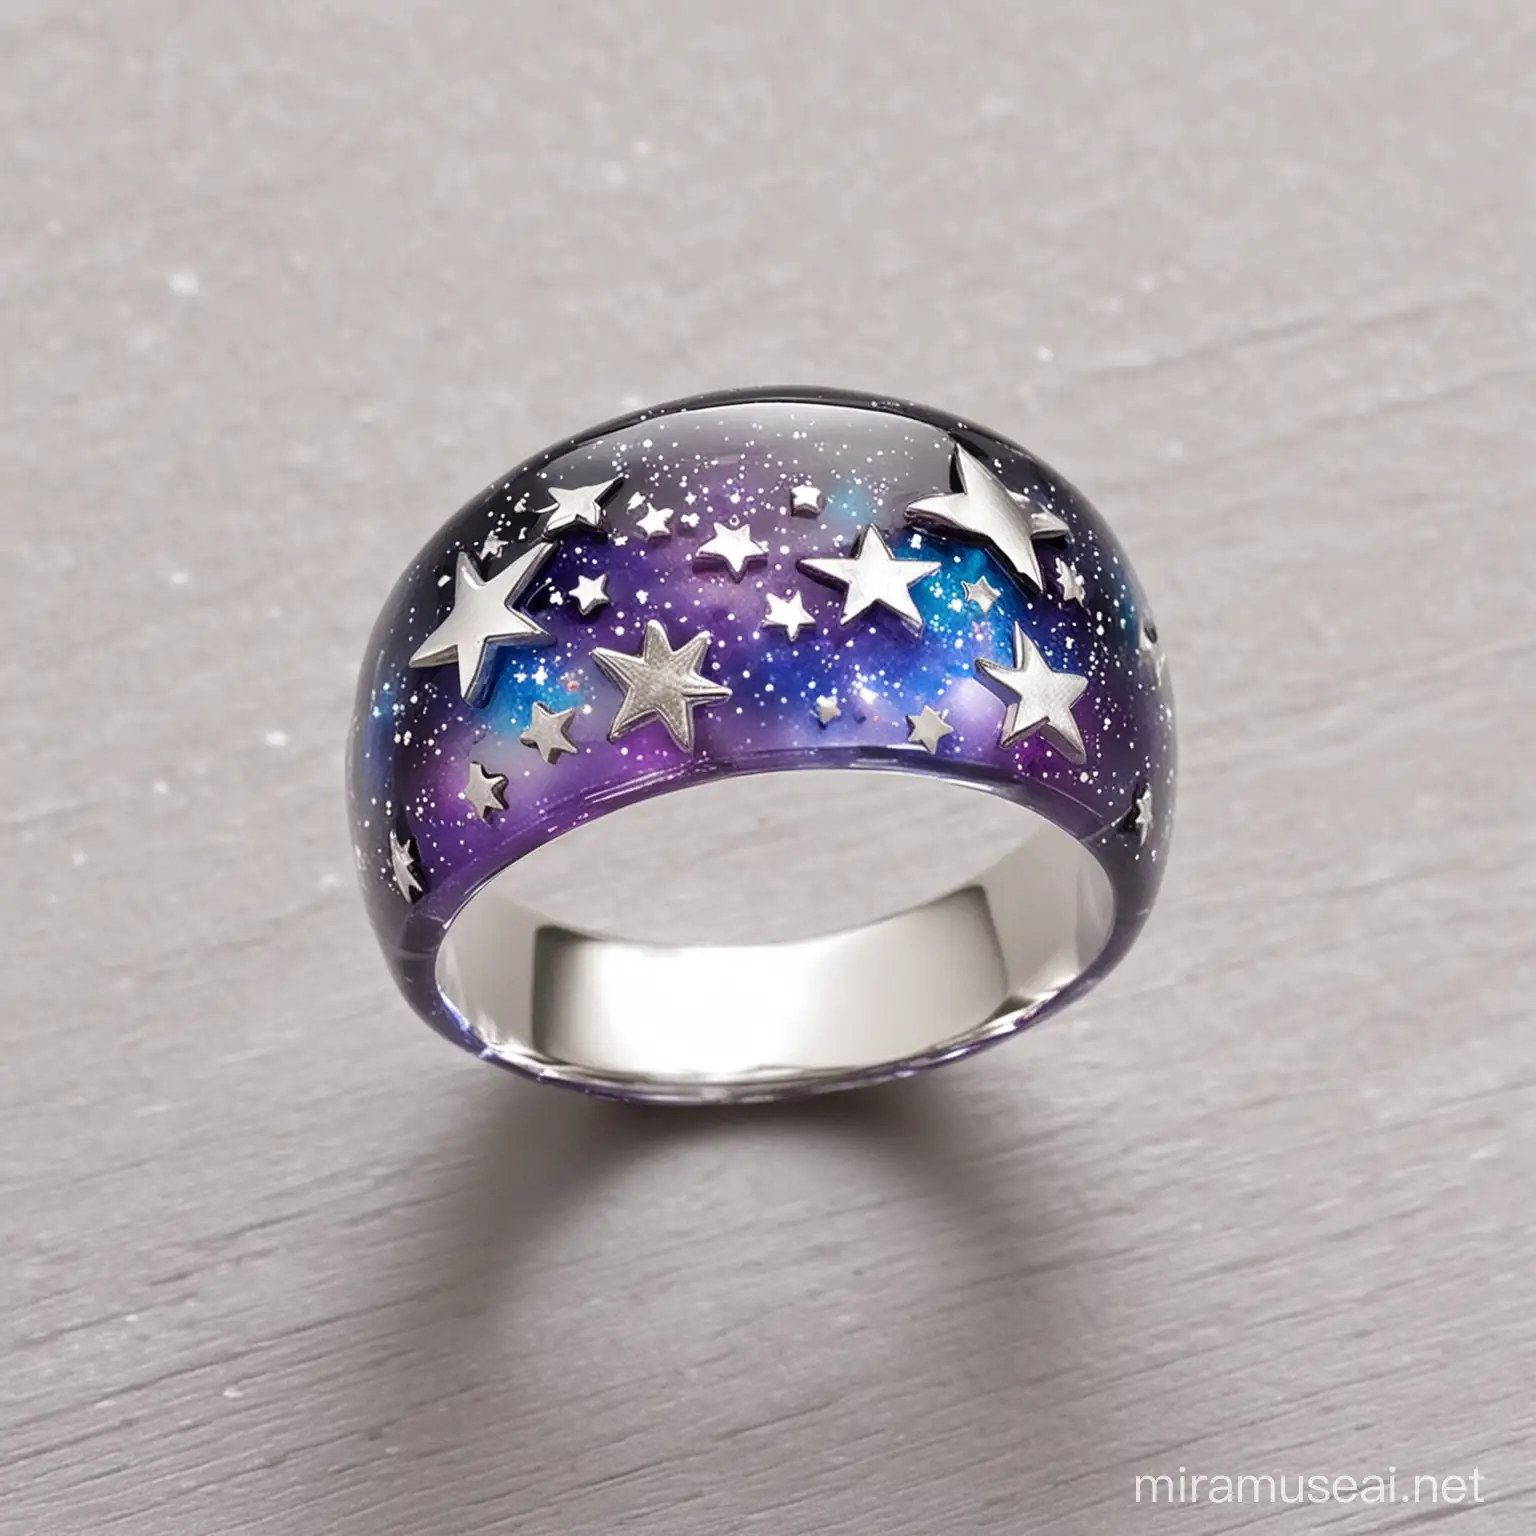 GalaxyInspired Resin Ring with Silver Stars Handcrafted Celestial Jewelry